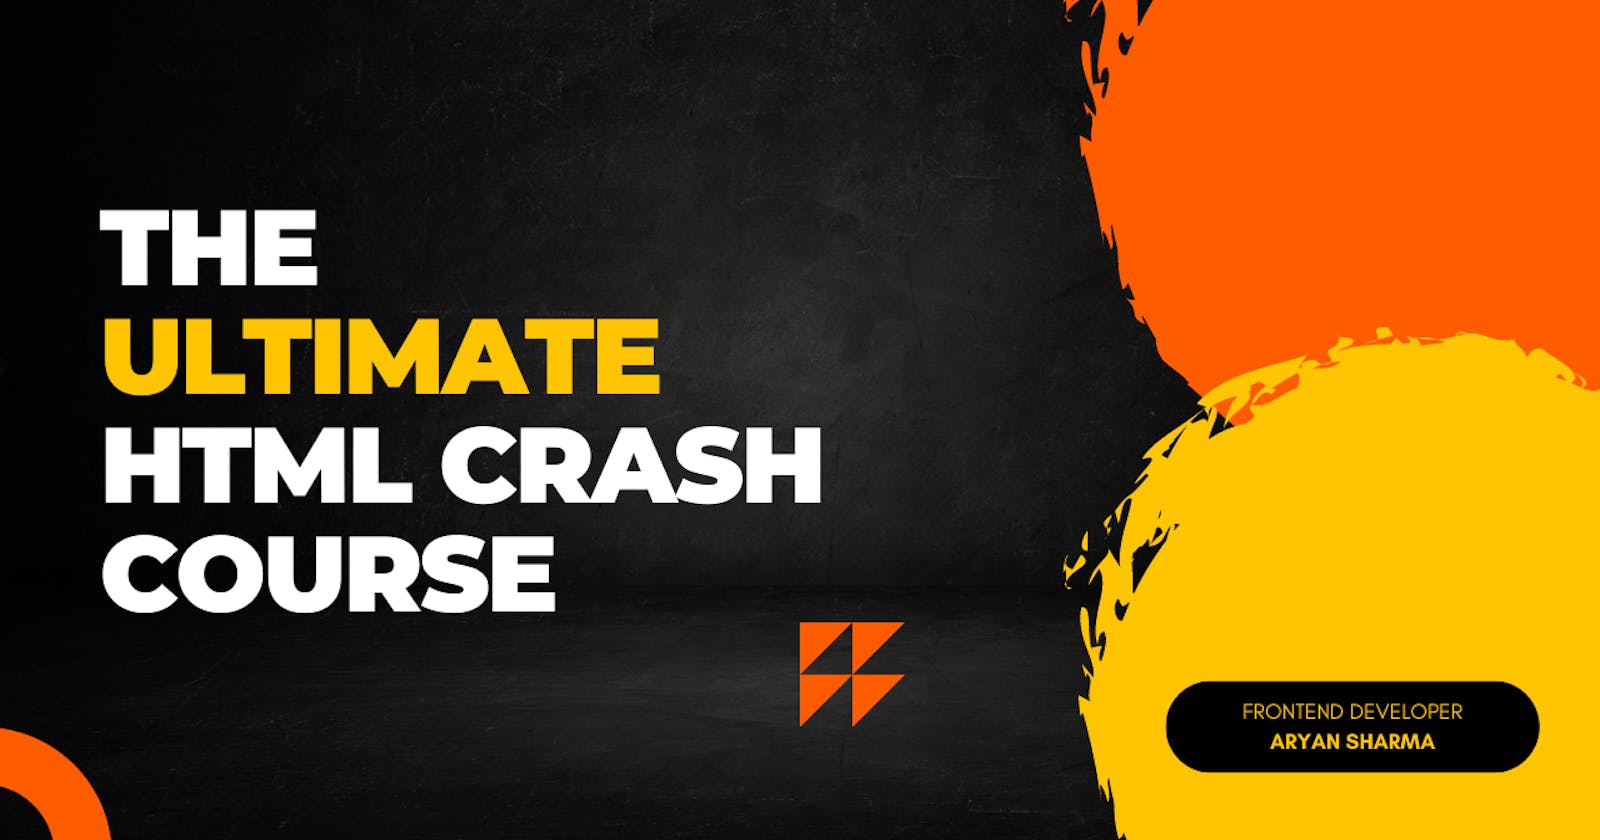 The Ultimate HTML Crash Course